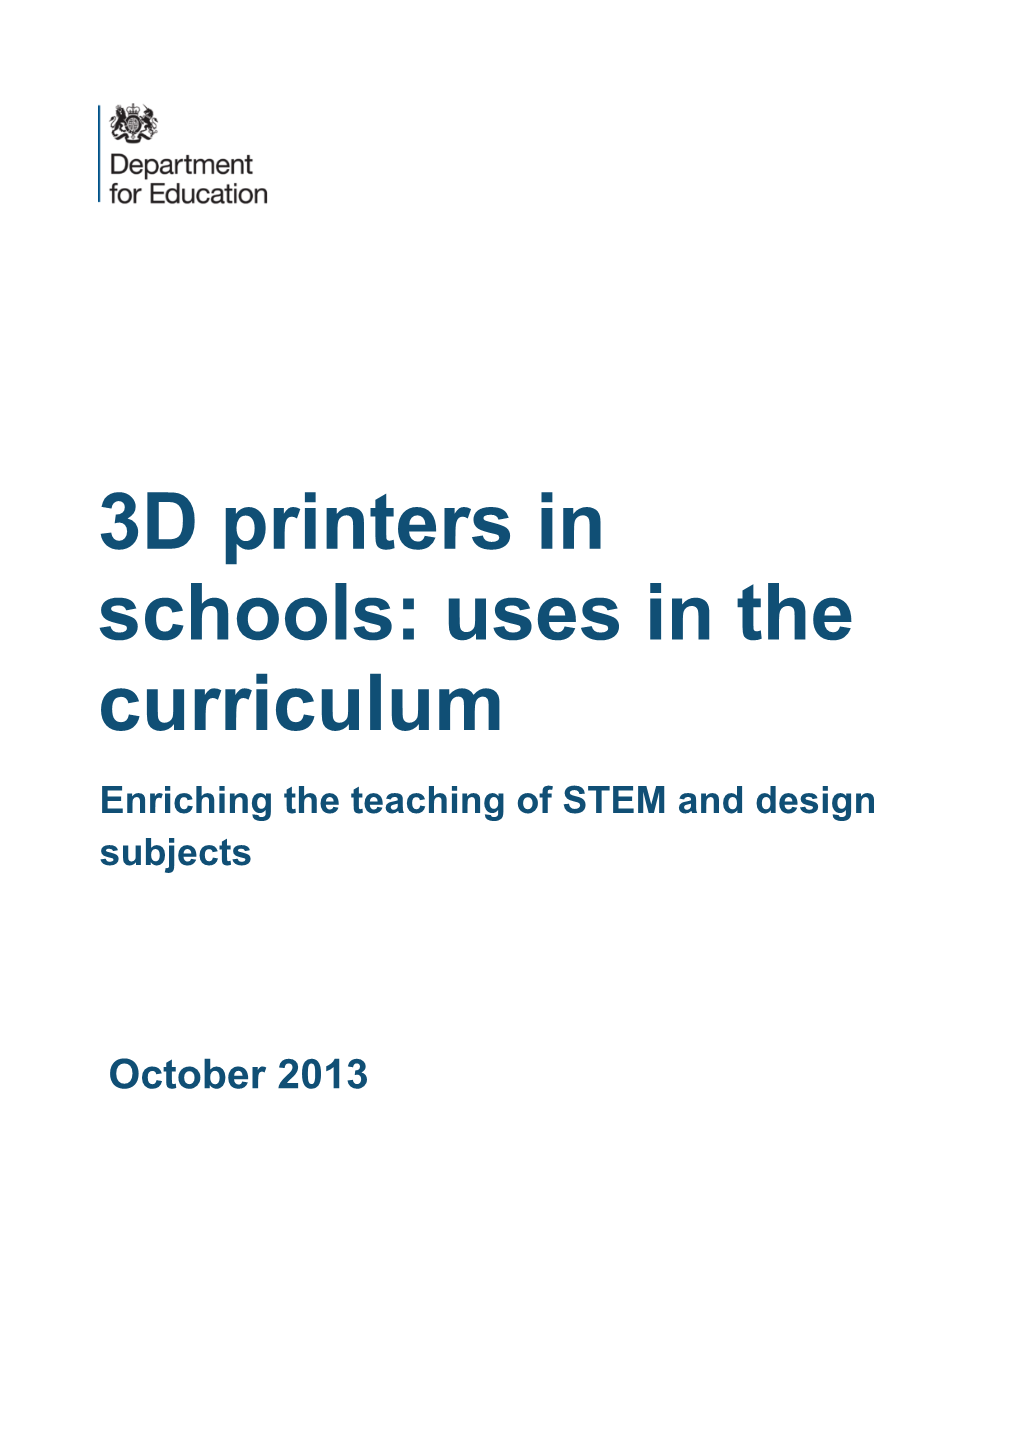 3D Printers in Schools: Uses in the Curriculum Enriching the Teaching of STEM and Design Subjects